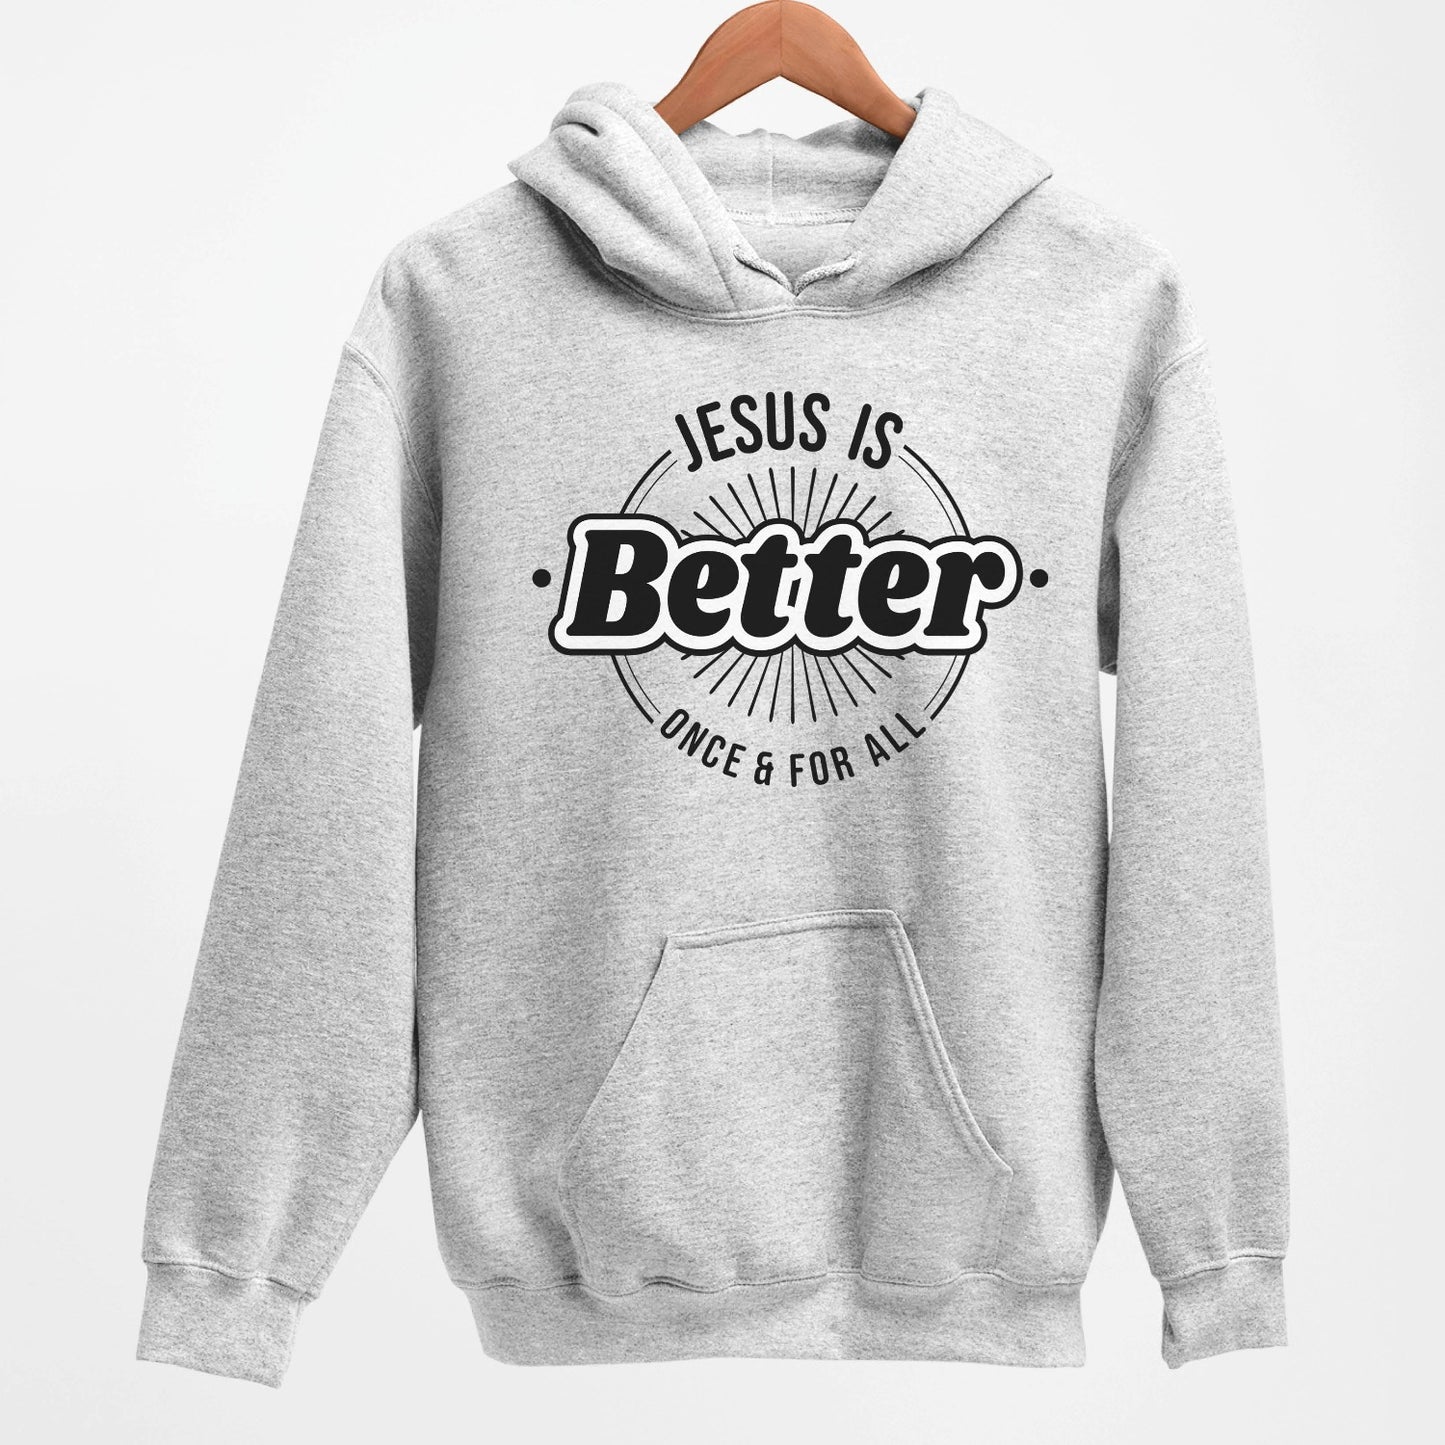 Sport Heather Gray color faith-based oversized cozy hoodie with "Jesus is BETTER - Once and For All" logo style design in black and white, created for Christian men and women